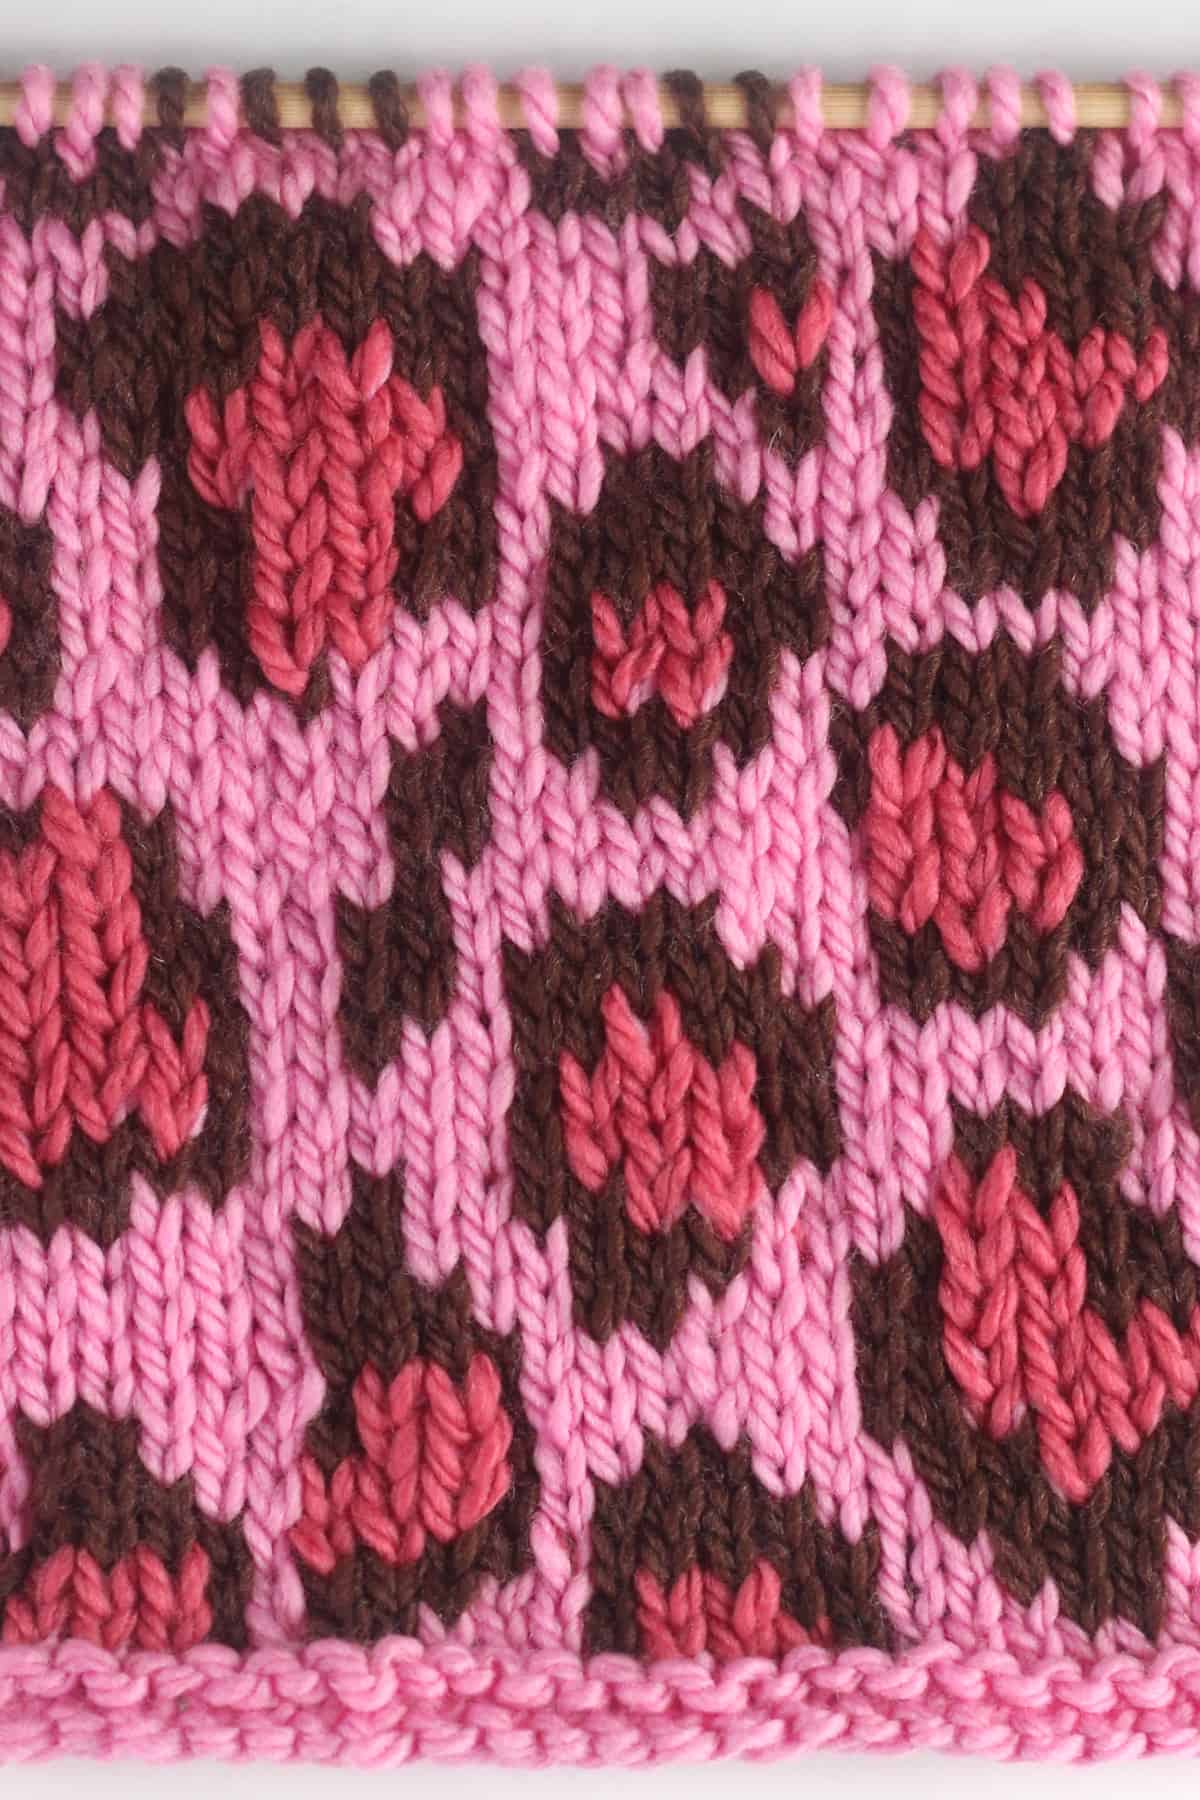 Leopard Print knit stitch stranded colorwork pattern in shades of pink and brown colored yarn on a knitting needle.